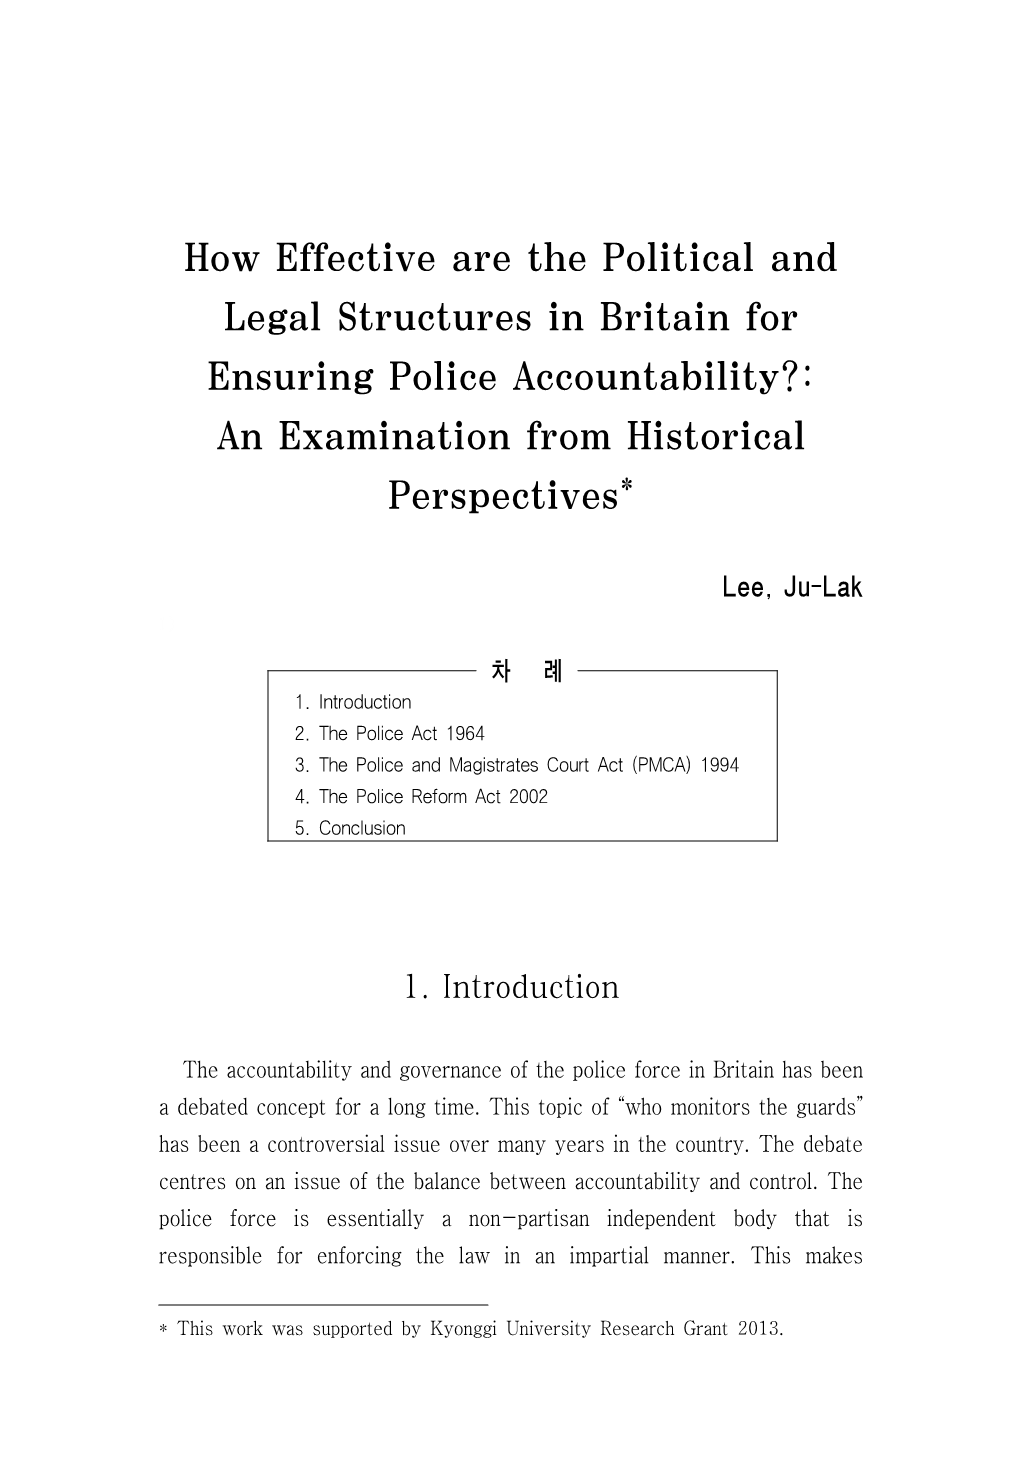 How Effective Are the Political and Legal Structures in Britain for Ensuring Police Accountability?: an Examination from Historical Perspectives*